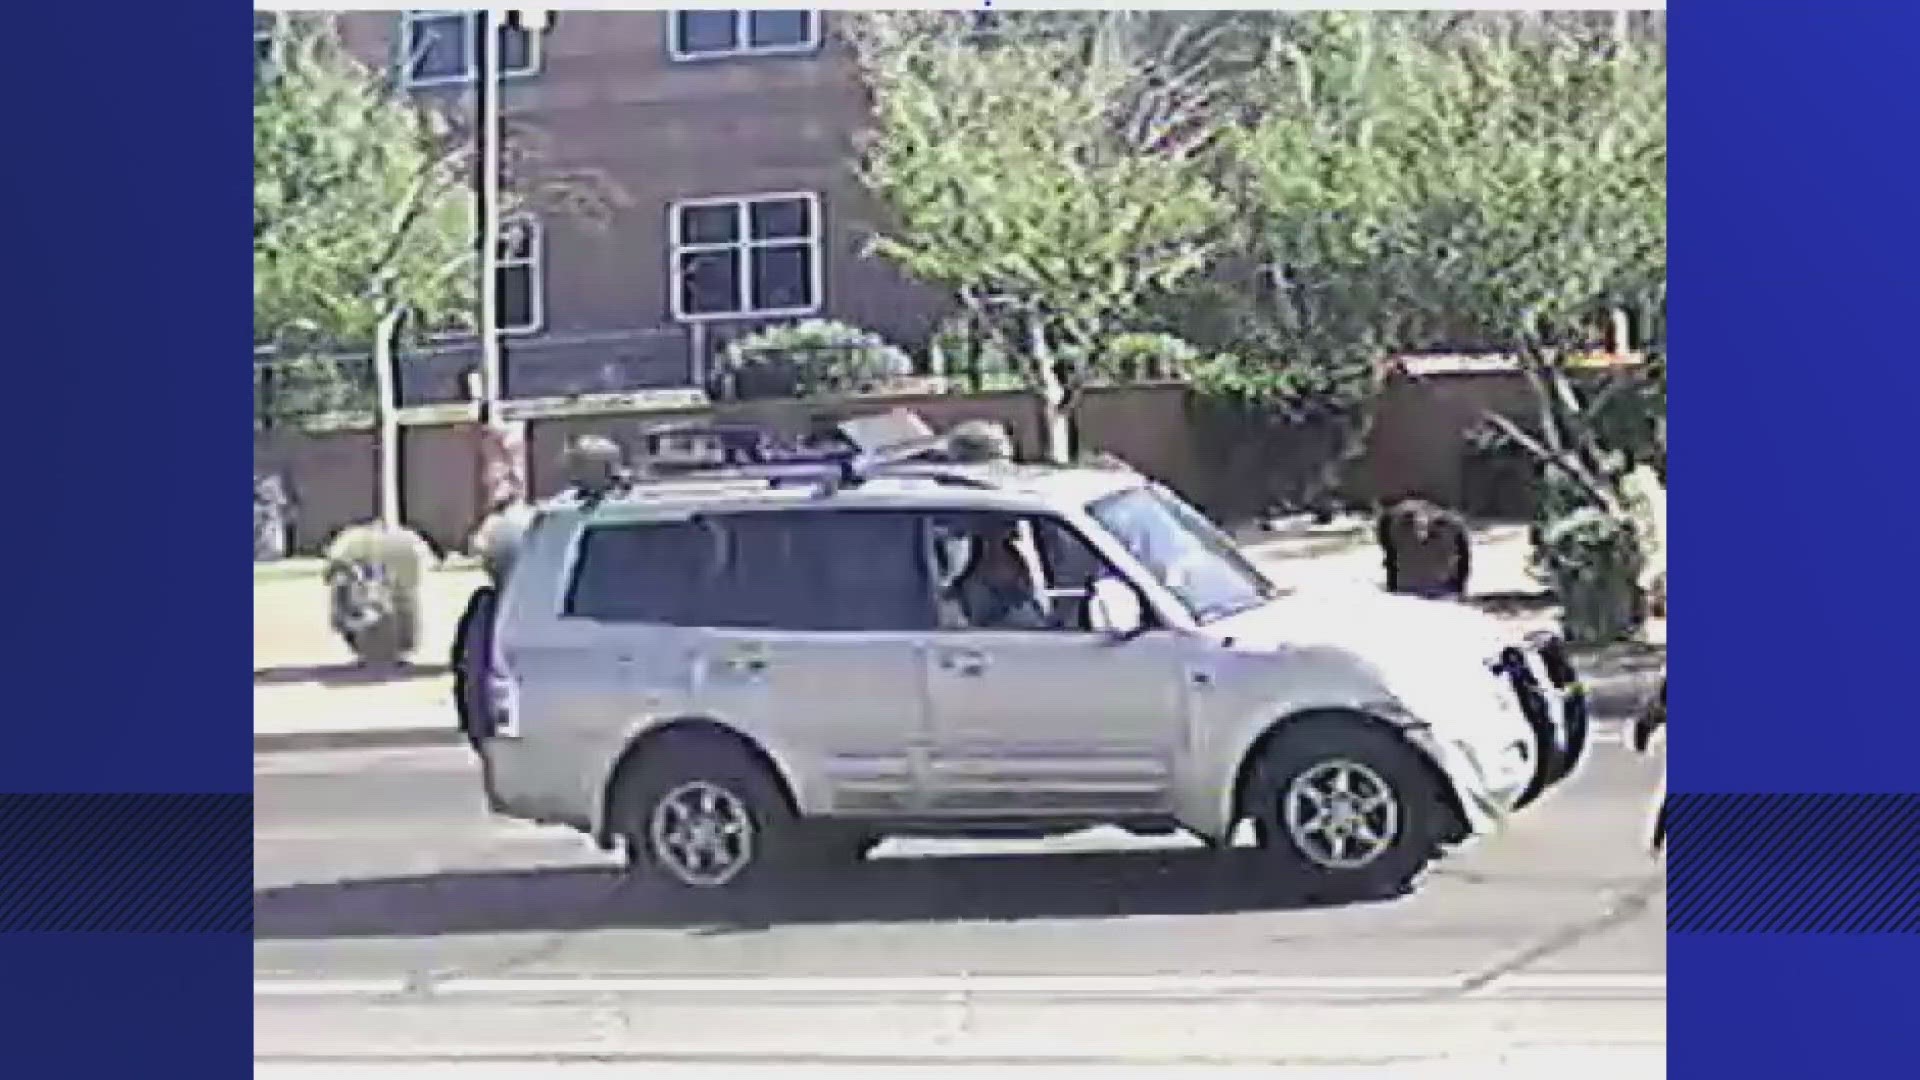 An 11-year-old girl was seriously injured after being hit by a car while she was in a crosswalk. Now police need your help finding the driver.